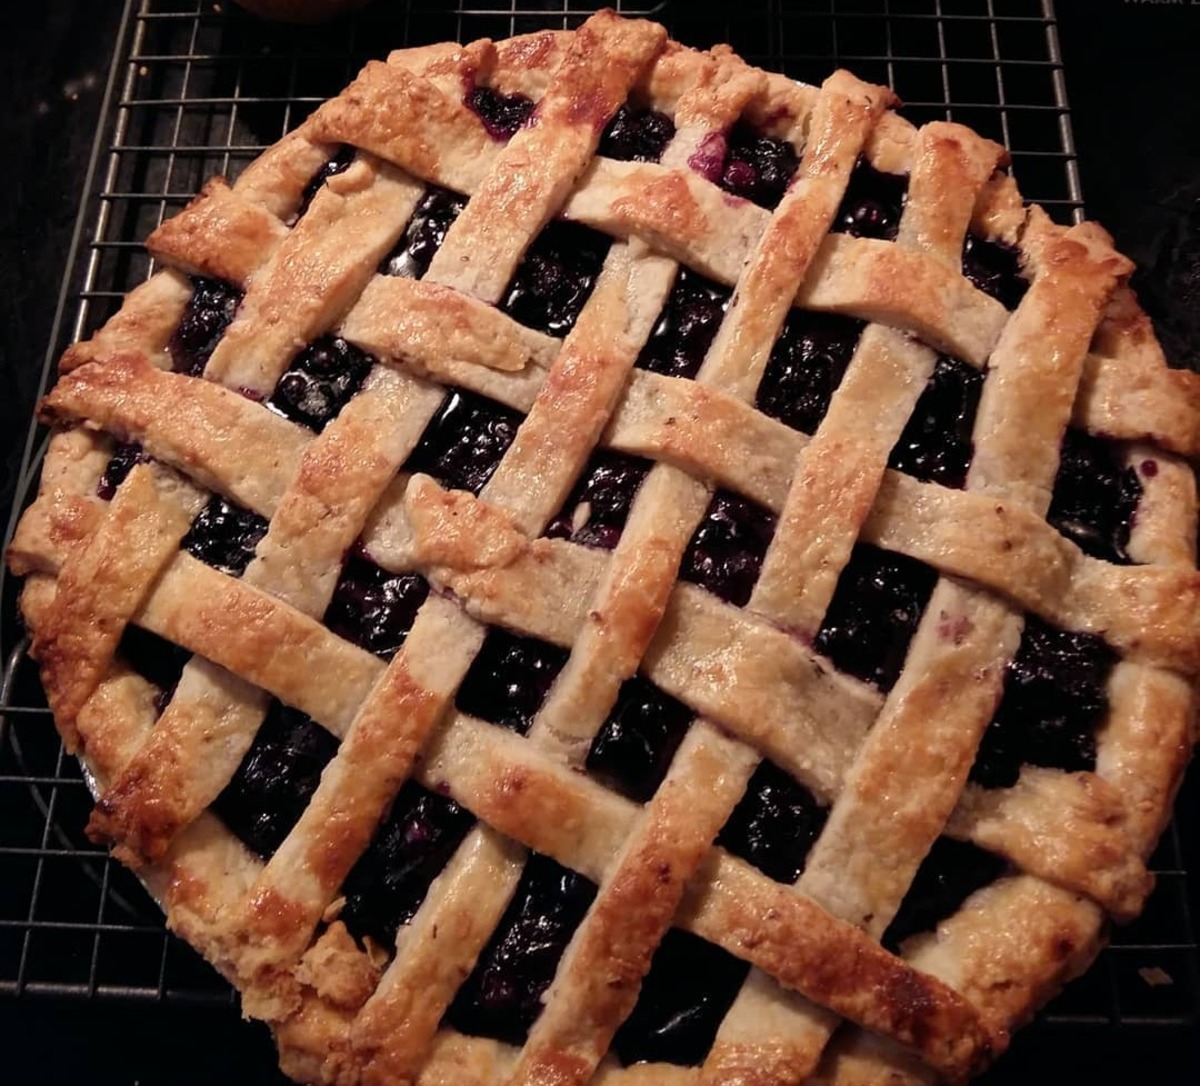 Perfect Blueberry Pie Filling Recipe 